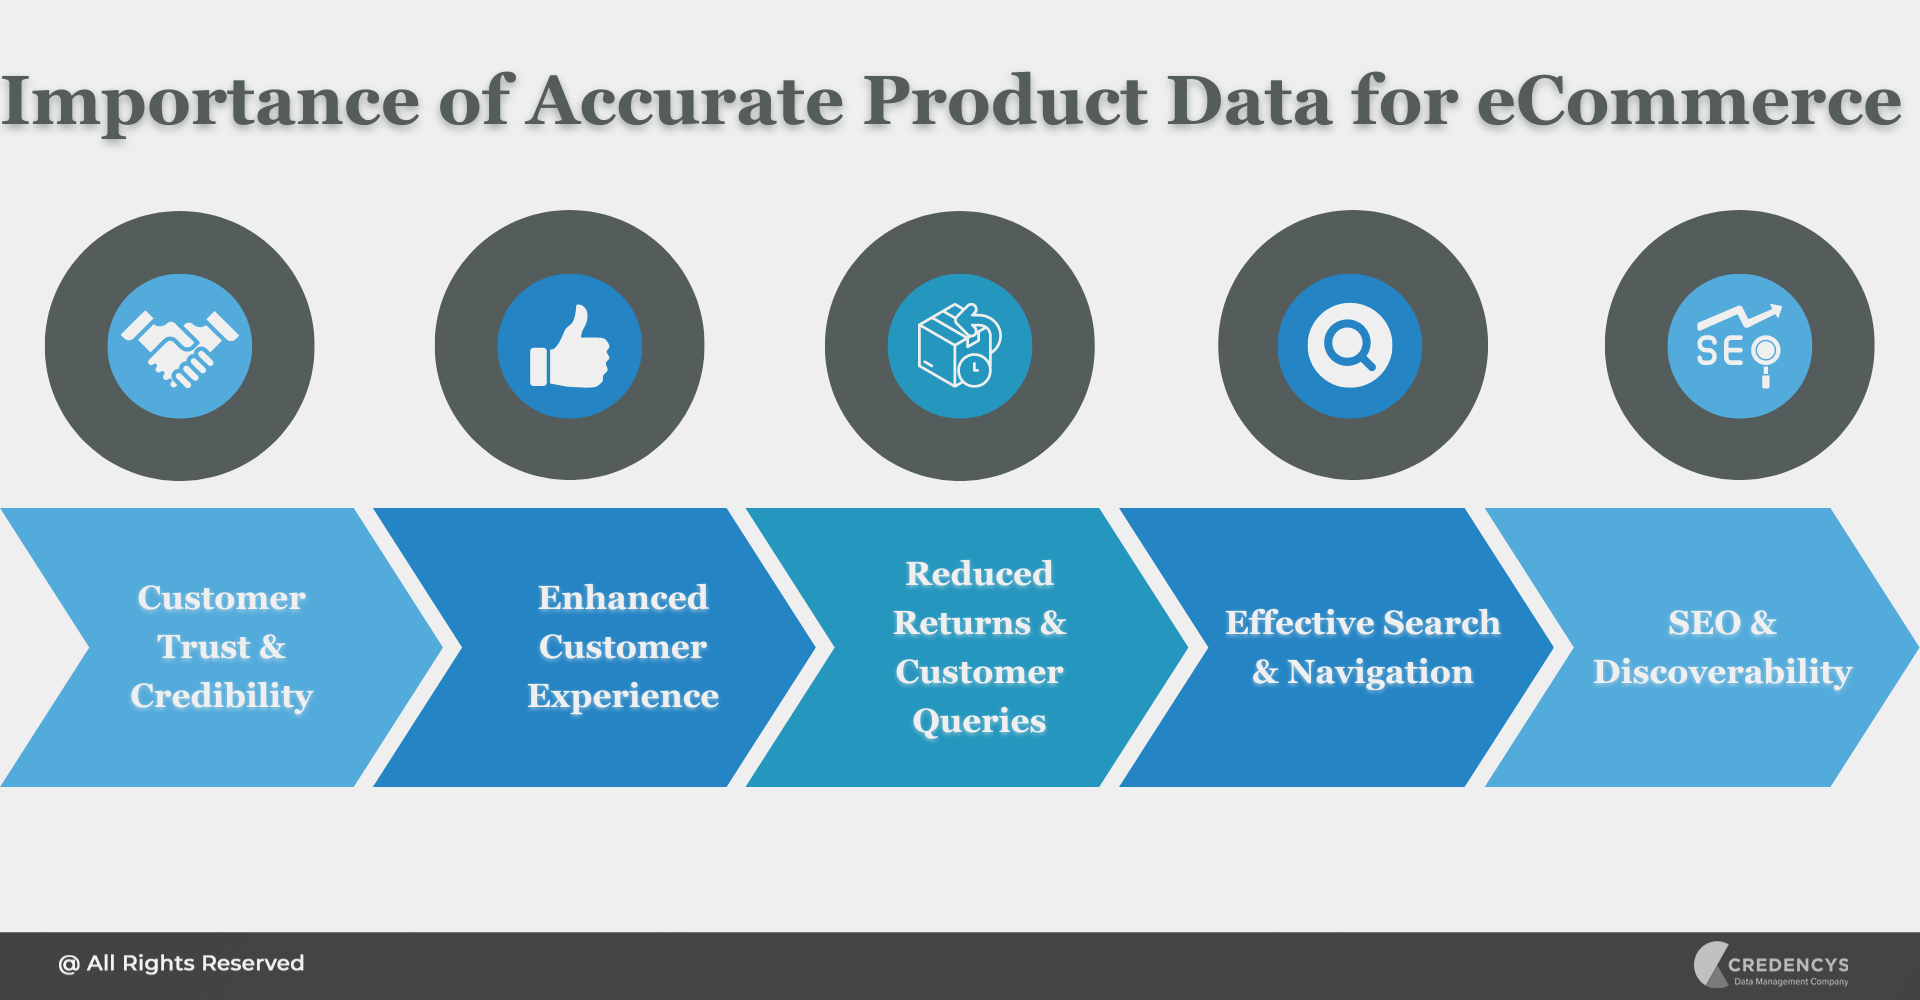 Importance of Accurate and Consistent Product Data for eCommerce